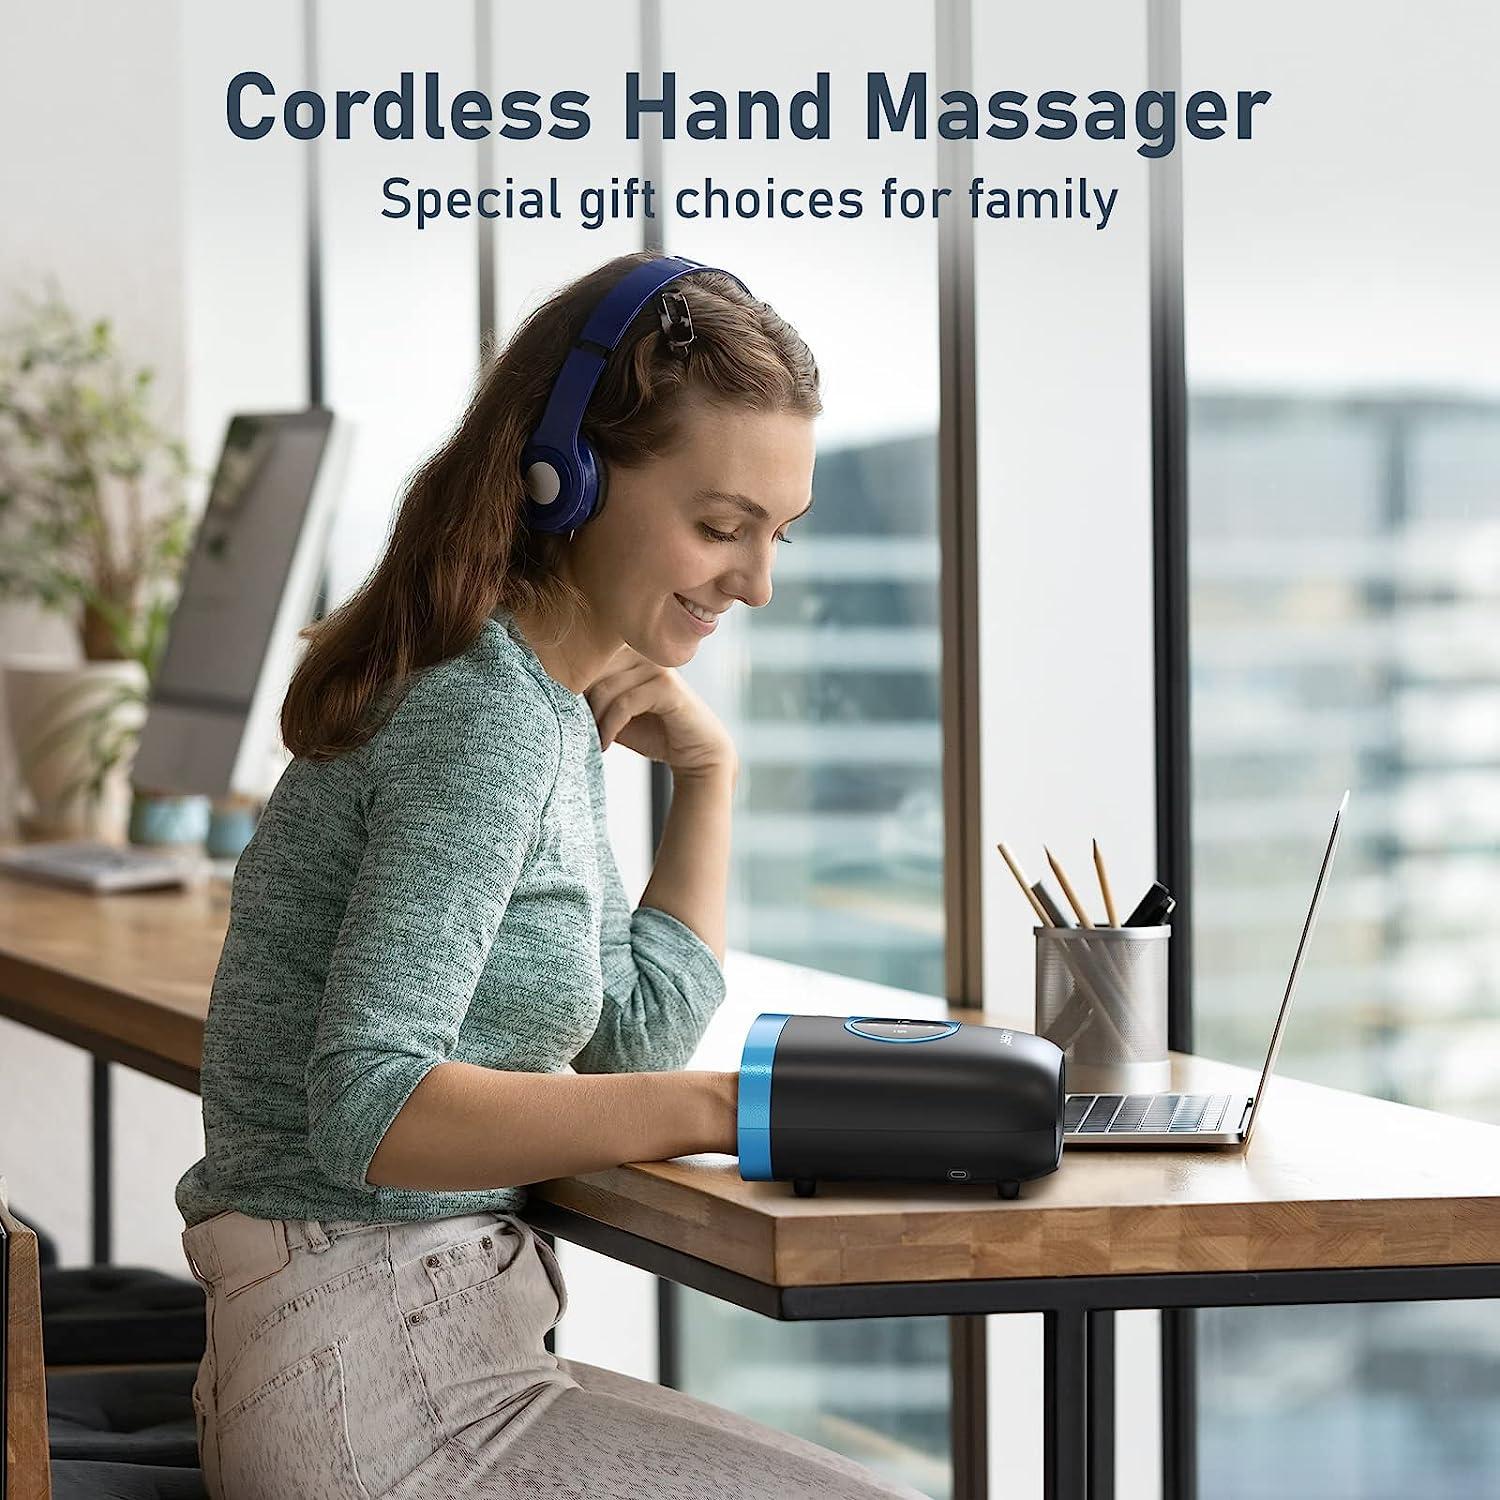 Hand Massager - Hand Massager For Arthritis And Carpal Tunnel - Cordless Hand  Massager With Heat And Air Compression For Pain Relief, Joint Pain